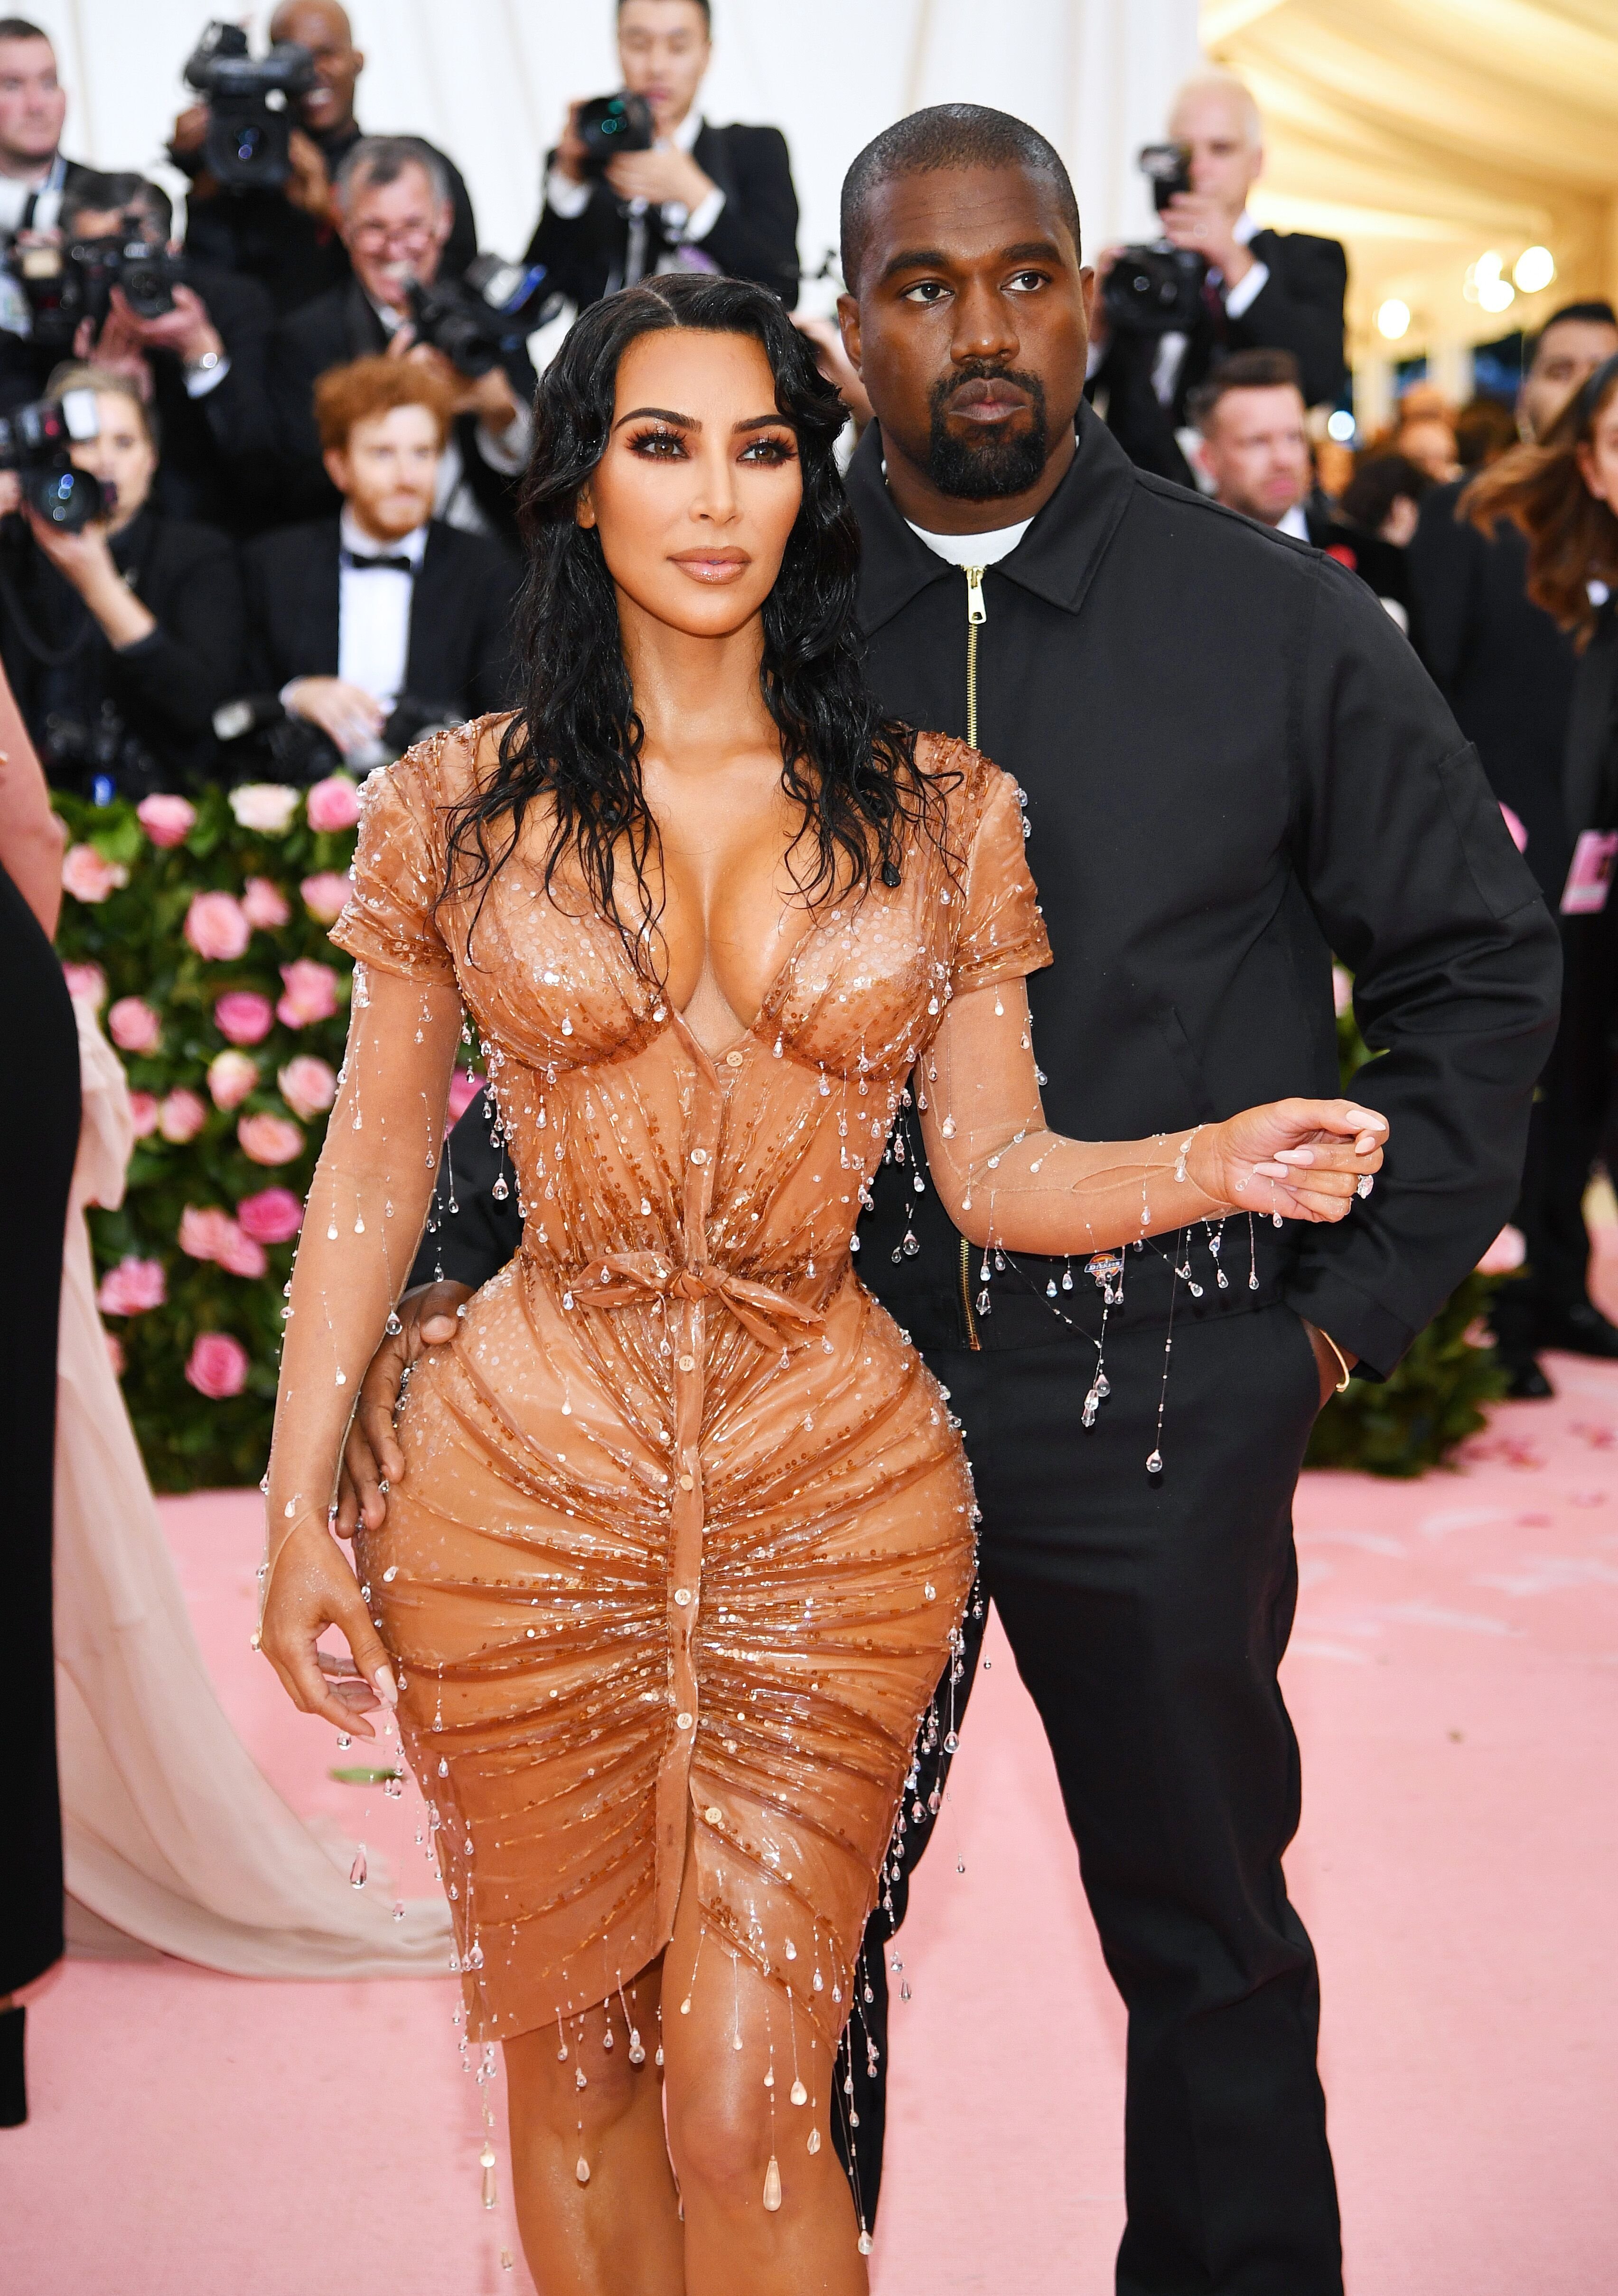 Kim Kardashian West and Kanye West attend The 2019 Met Gala Celebrating Camp: Notes on Fashion at Metropolitan Museum of Art on May 06, 2019 in New York City | Source: Getty Images